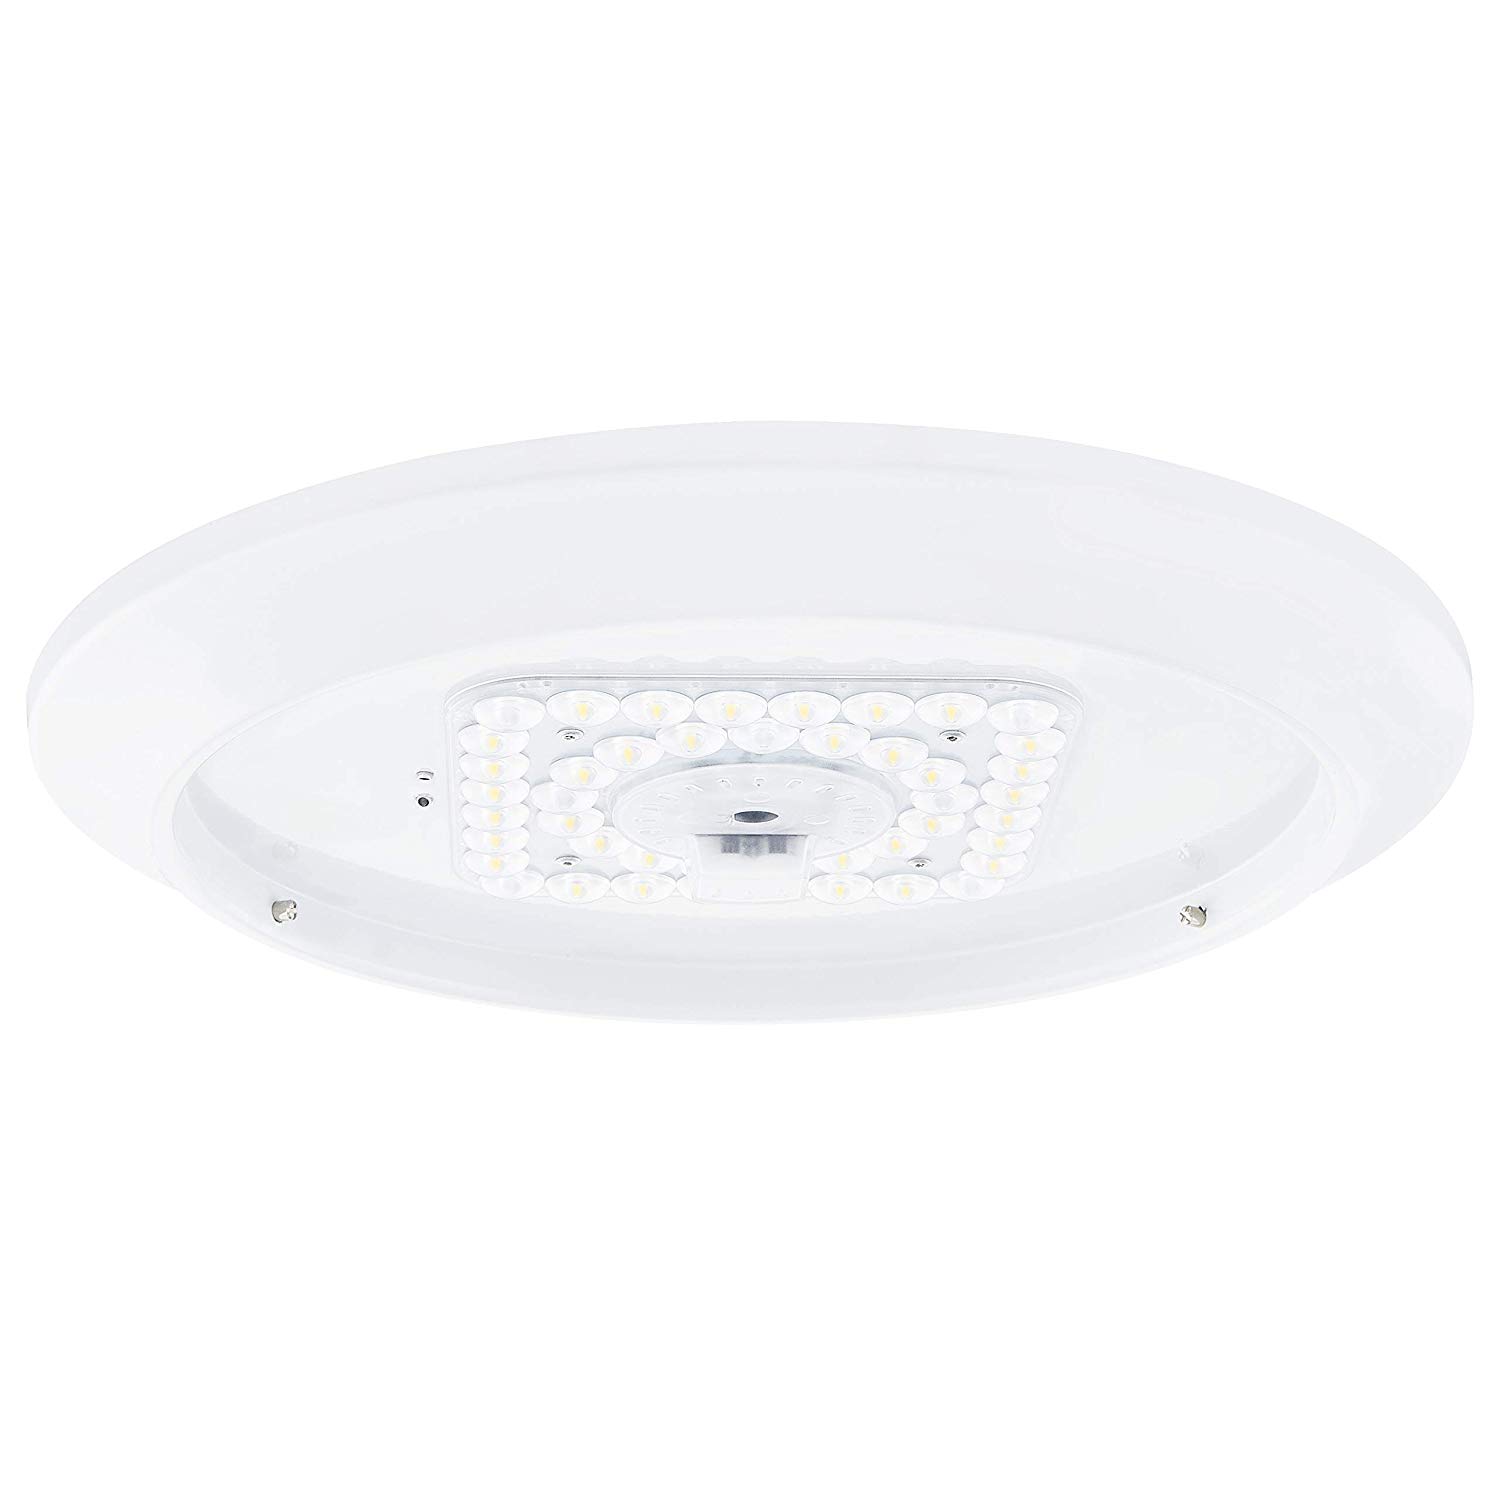 GRUENLICH LED Flush Mount Ceiling Lighting Fixture, 13 Inch Dimmable 22W (150W Replacement) 1360 Lumen, Metal Housing with White Finish, ETL and Damp Location Rated 